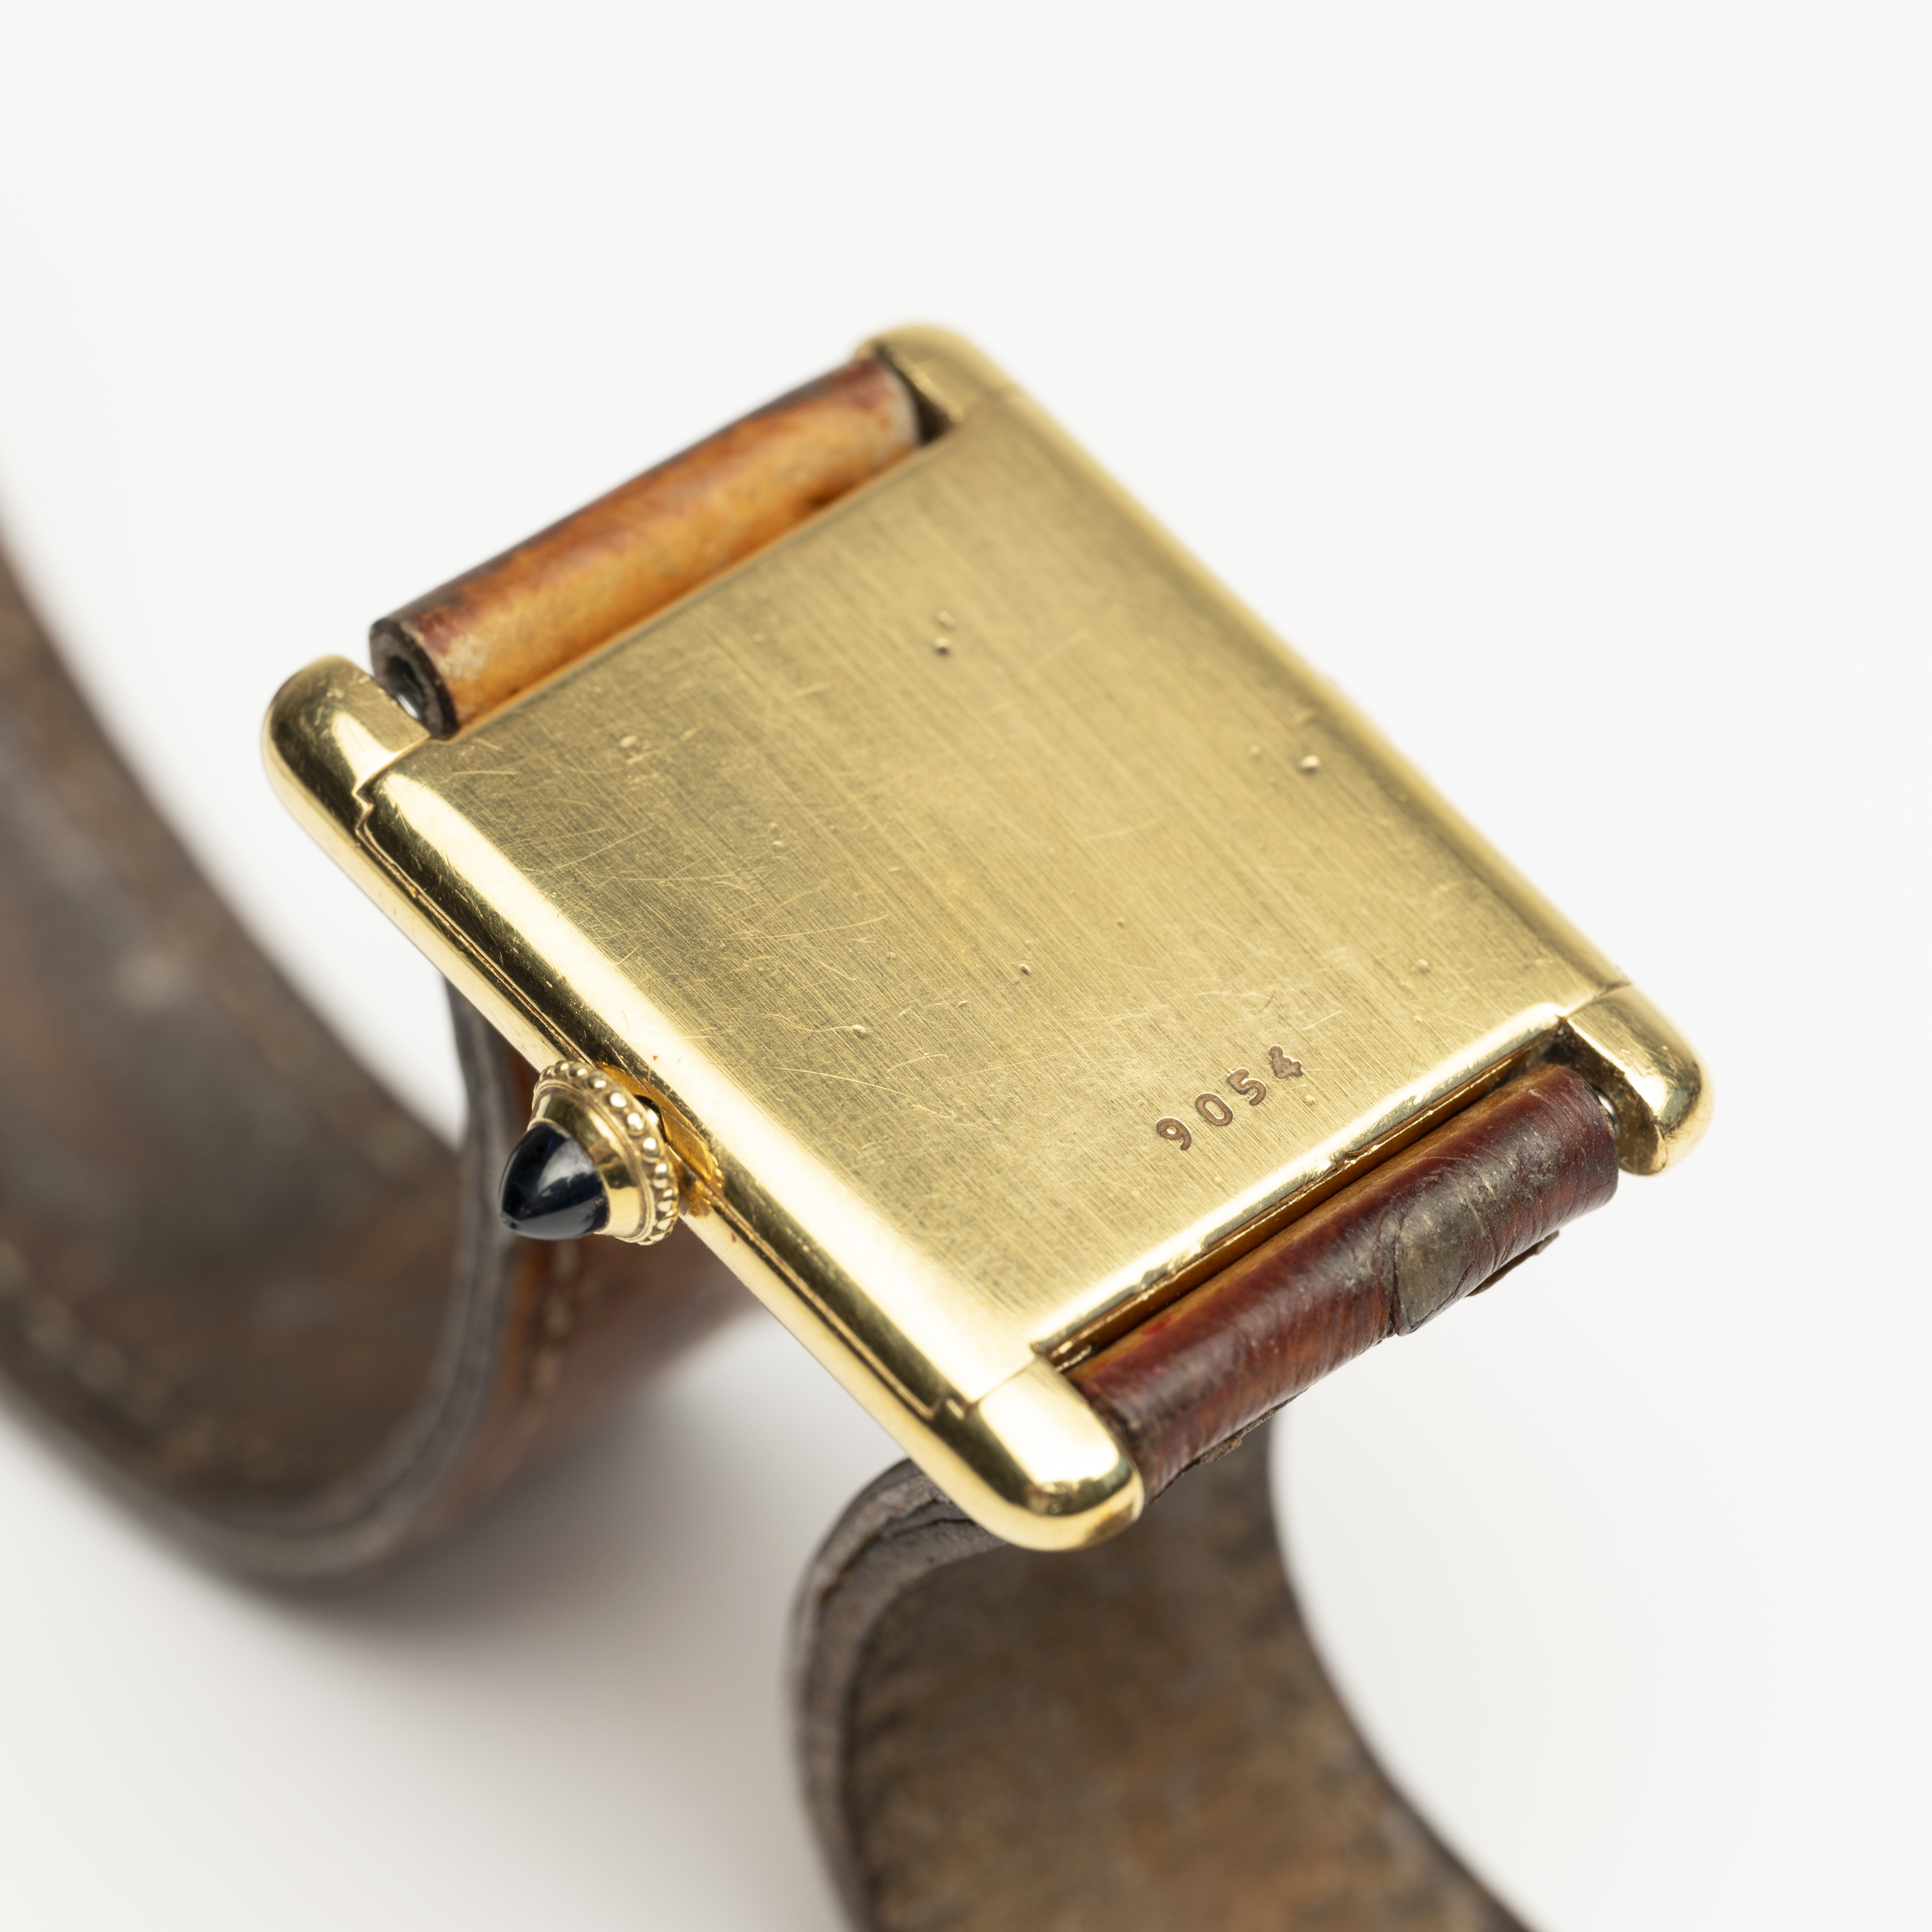 A VERY RARE GENTLEMAN'S SIZE 18K SOLID GOLD CARTIER LONDON TANK JC EXTRA PLATE WRIST WATCH CIRCA - Image 5 of 12